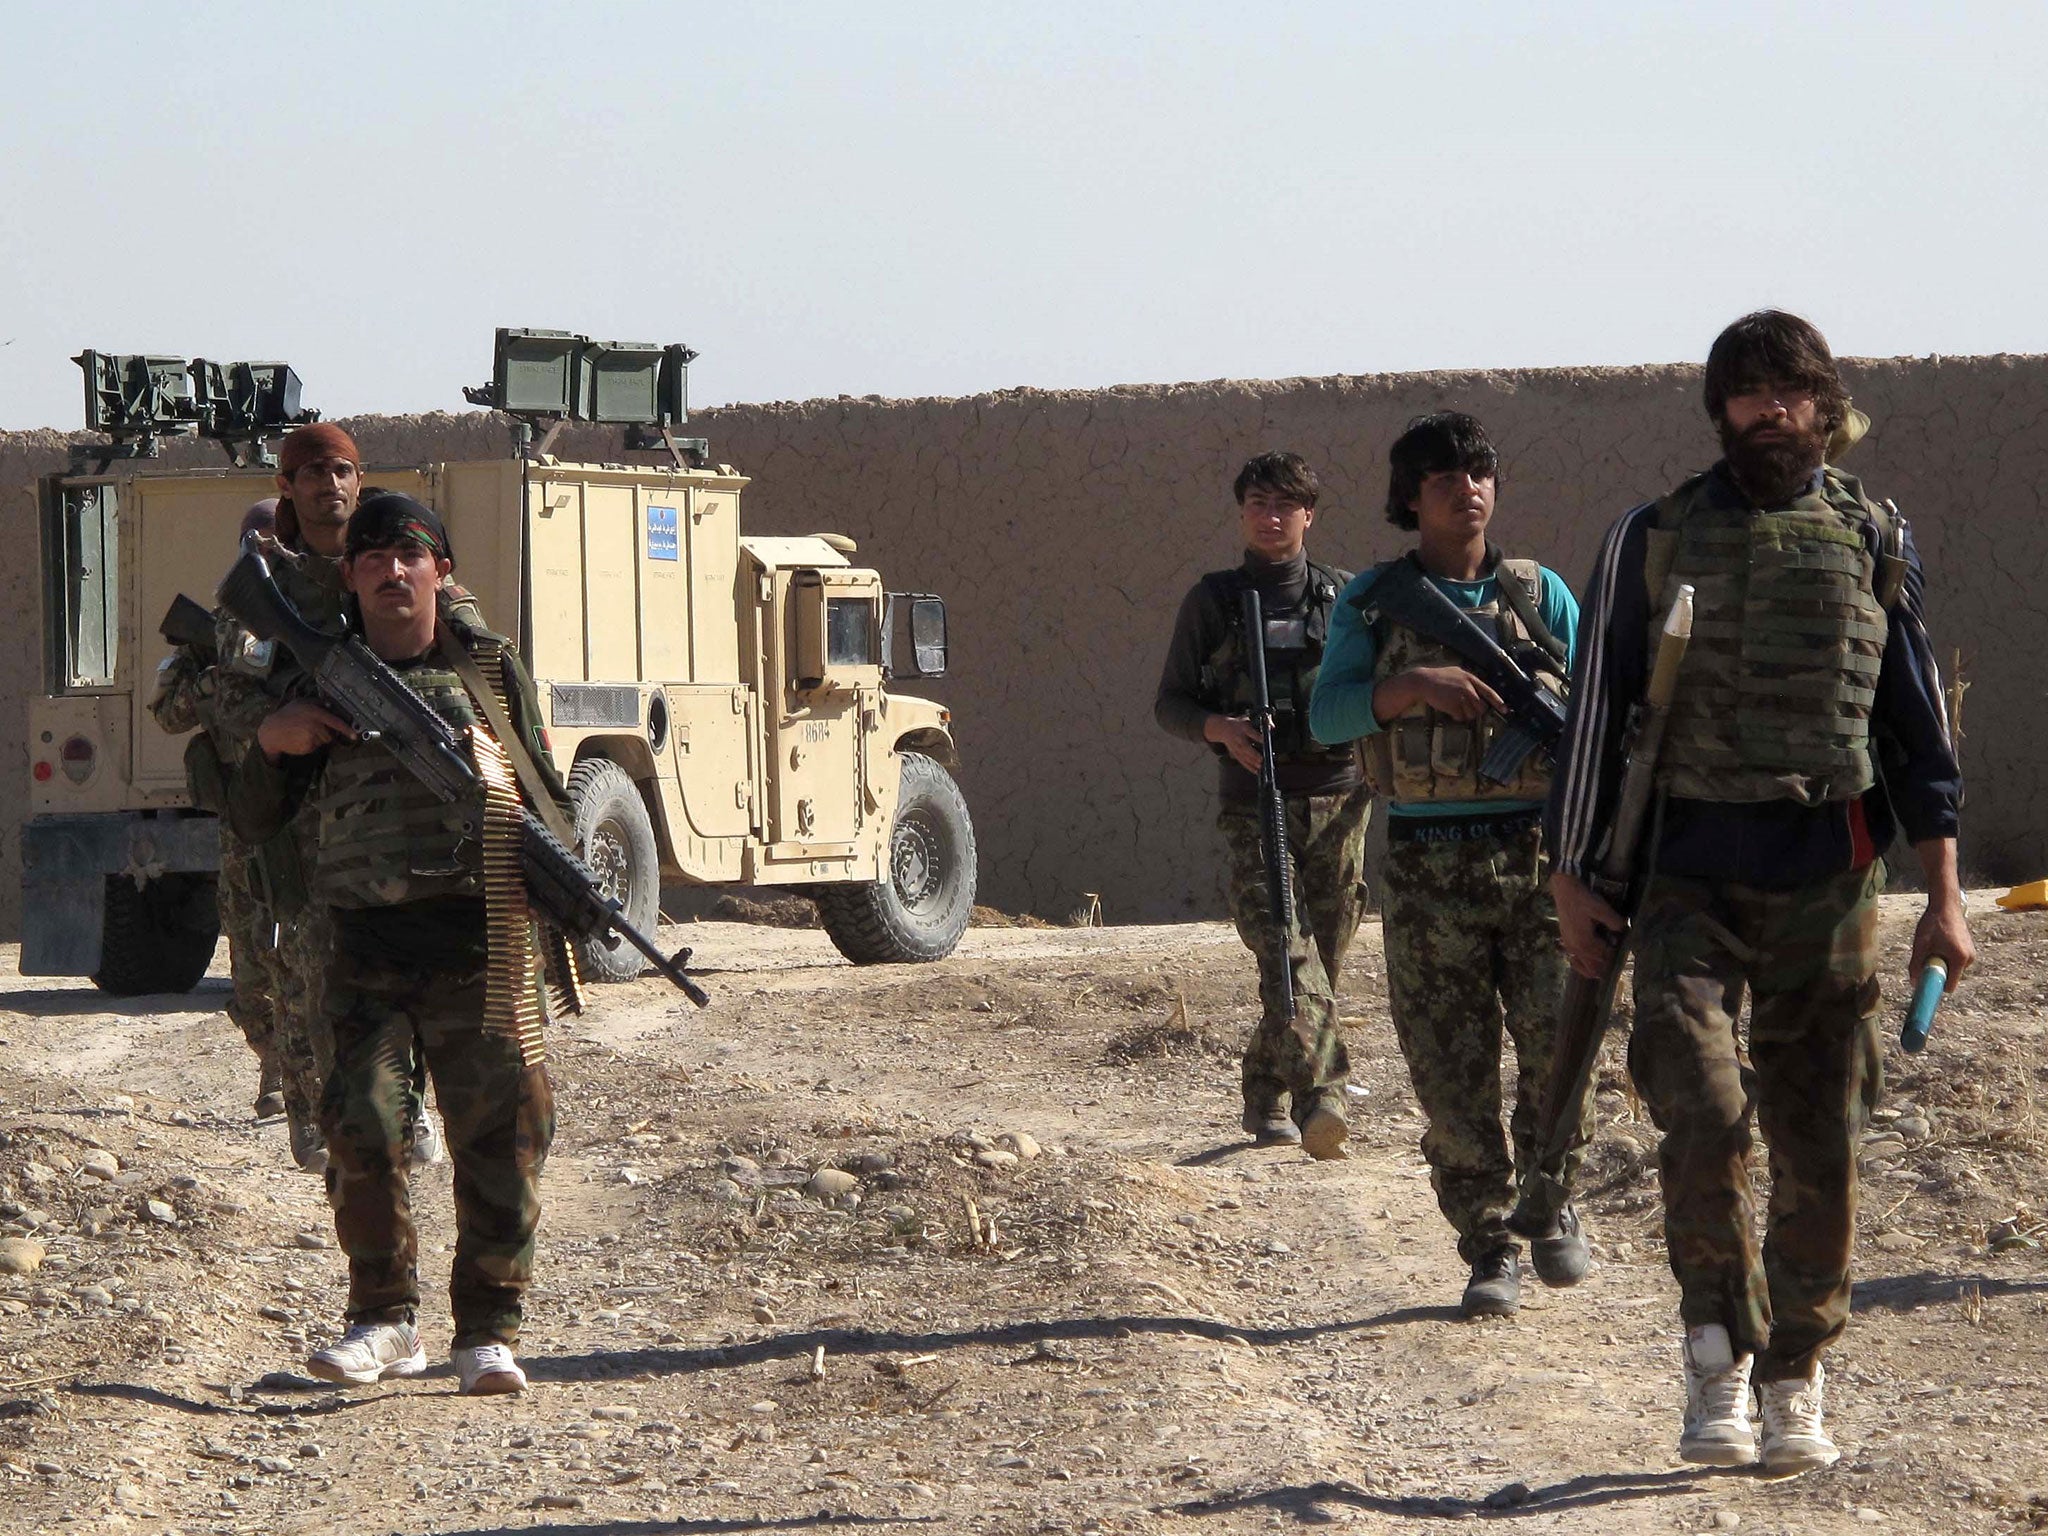 Afghan National Army (ANA) soldiers in Helmand on December 21, 2015.